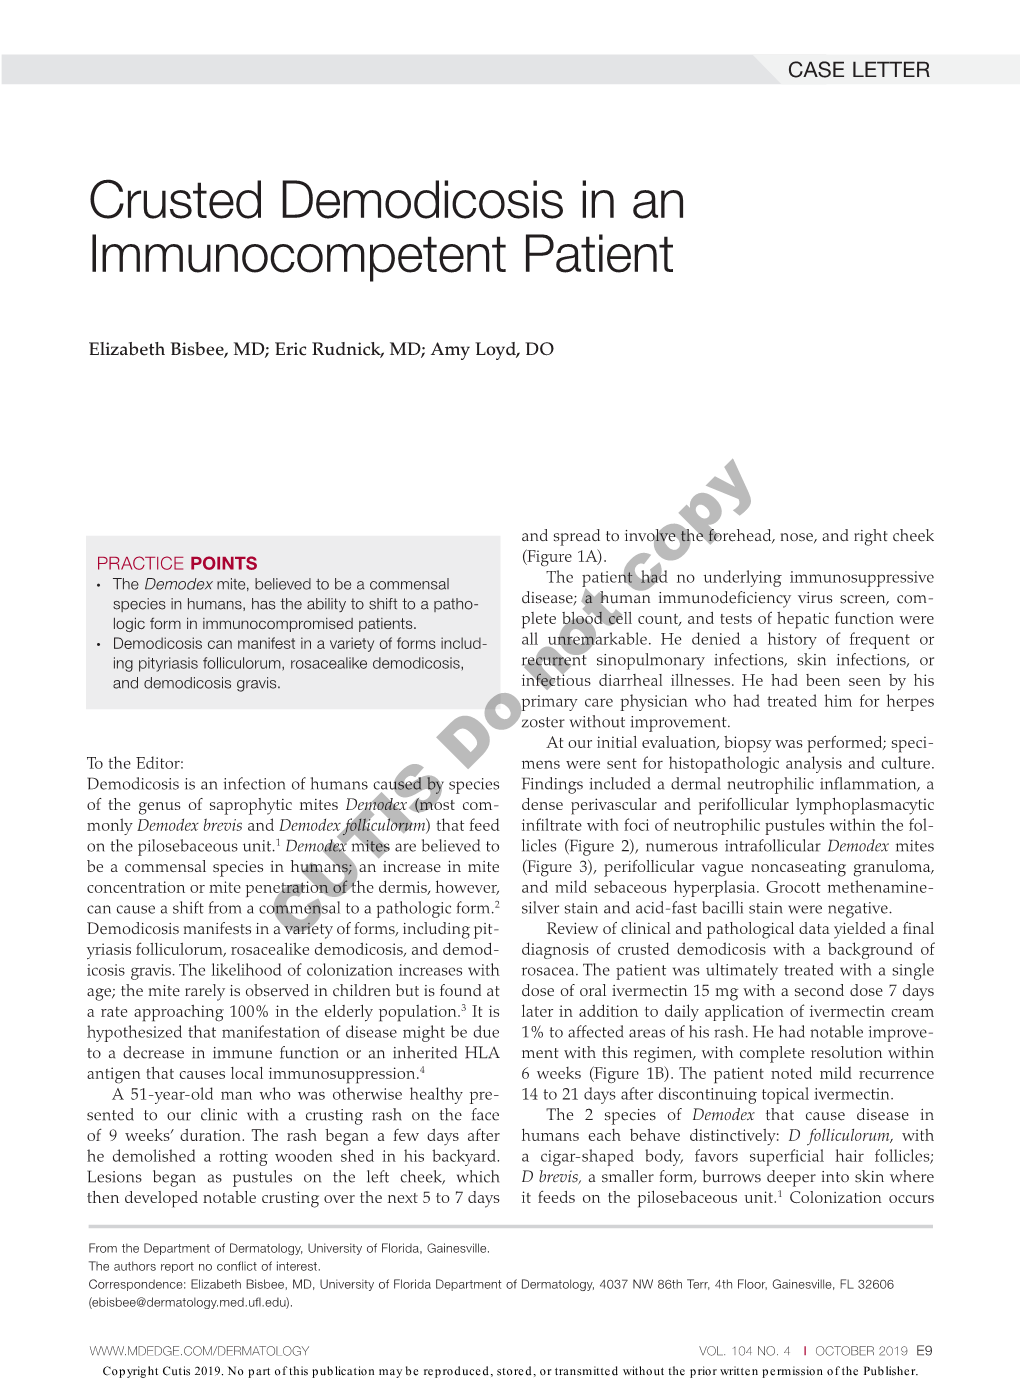 Crusted Demodicosis in an Immunocompetent Patient